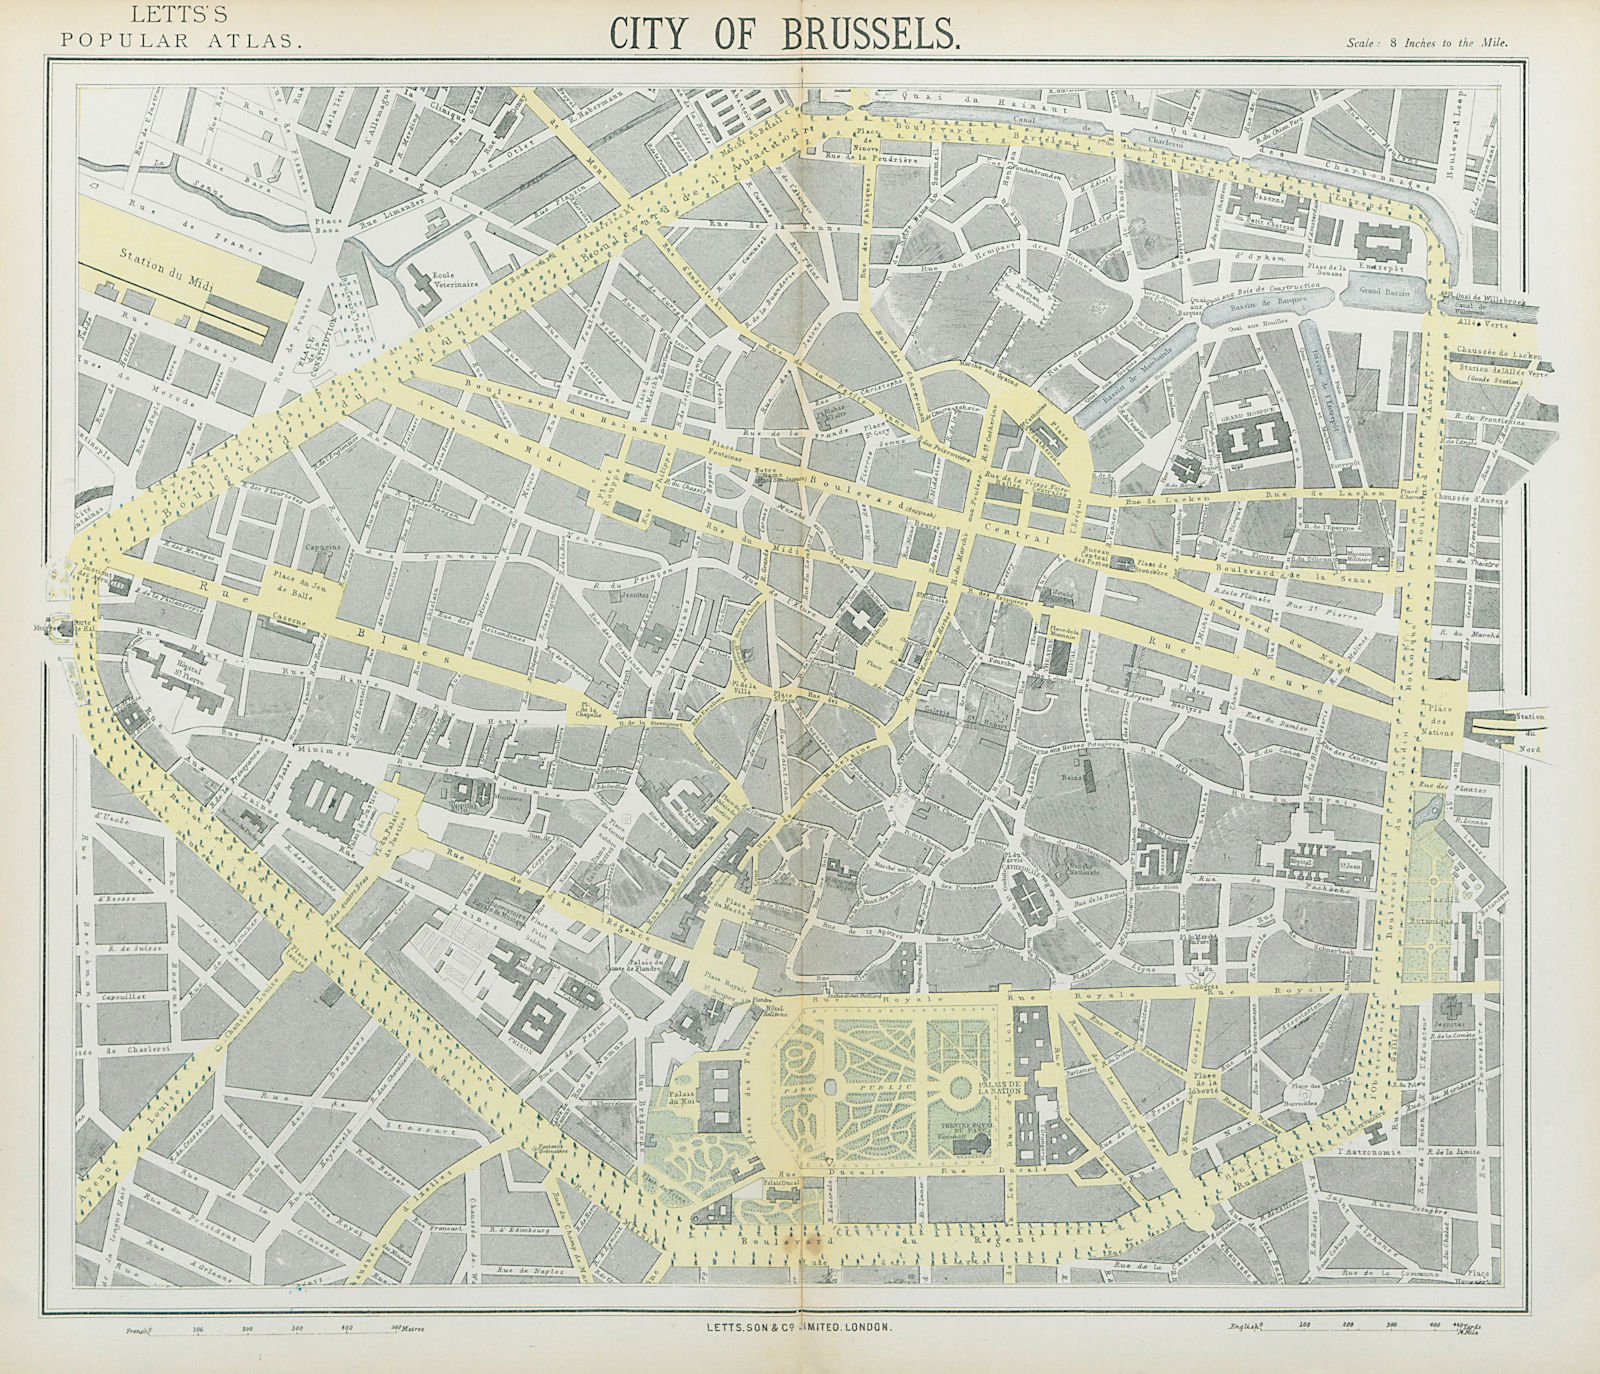 Associate Product BRUSSELS BRUXELLES BRUSSEL antique town city map plan. LETTS 1883 old